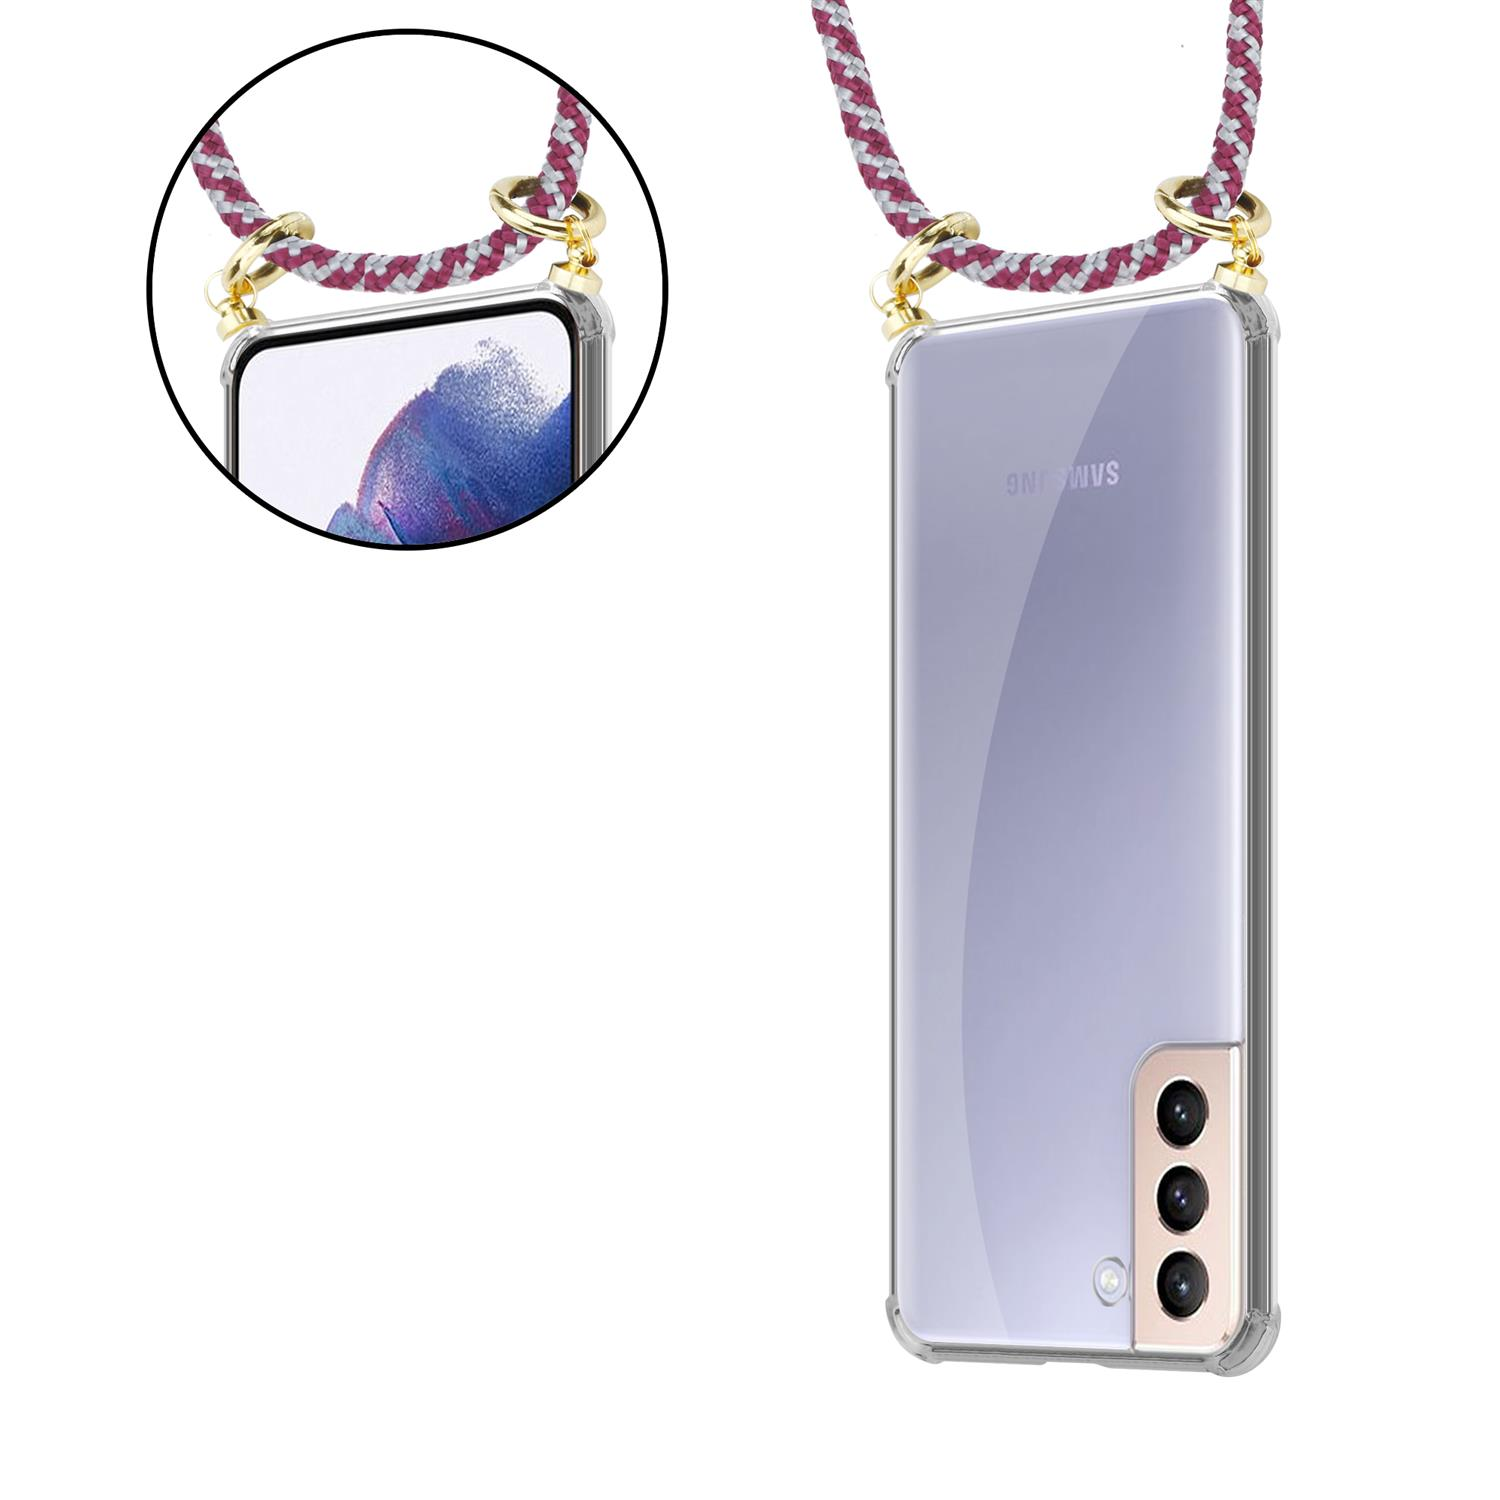 Kordel Hülle, und Samsung, Gold ROT Handy Band Backcover, Ringen, Kette abnehmbarer CADORABO S21 WEIß mit PLUS, Galaxy